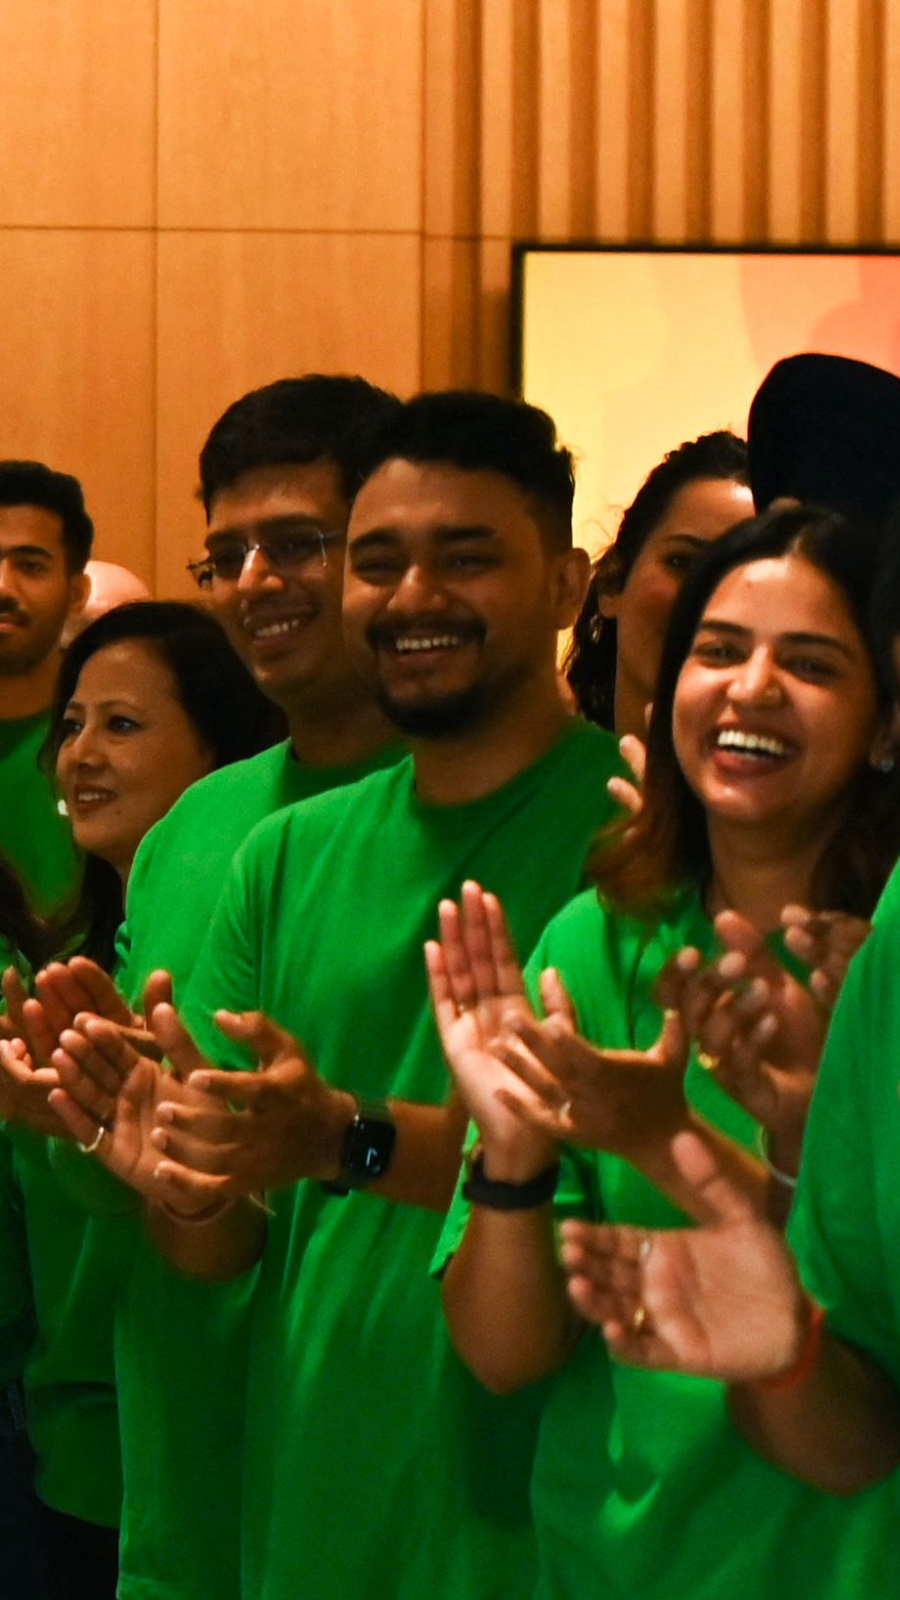 Apple Store Employees Salary: Apple Store Employees Earn Rs 1 Lakh Per Month. This Is Why 